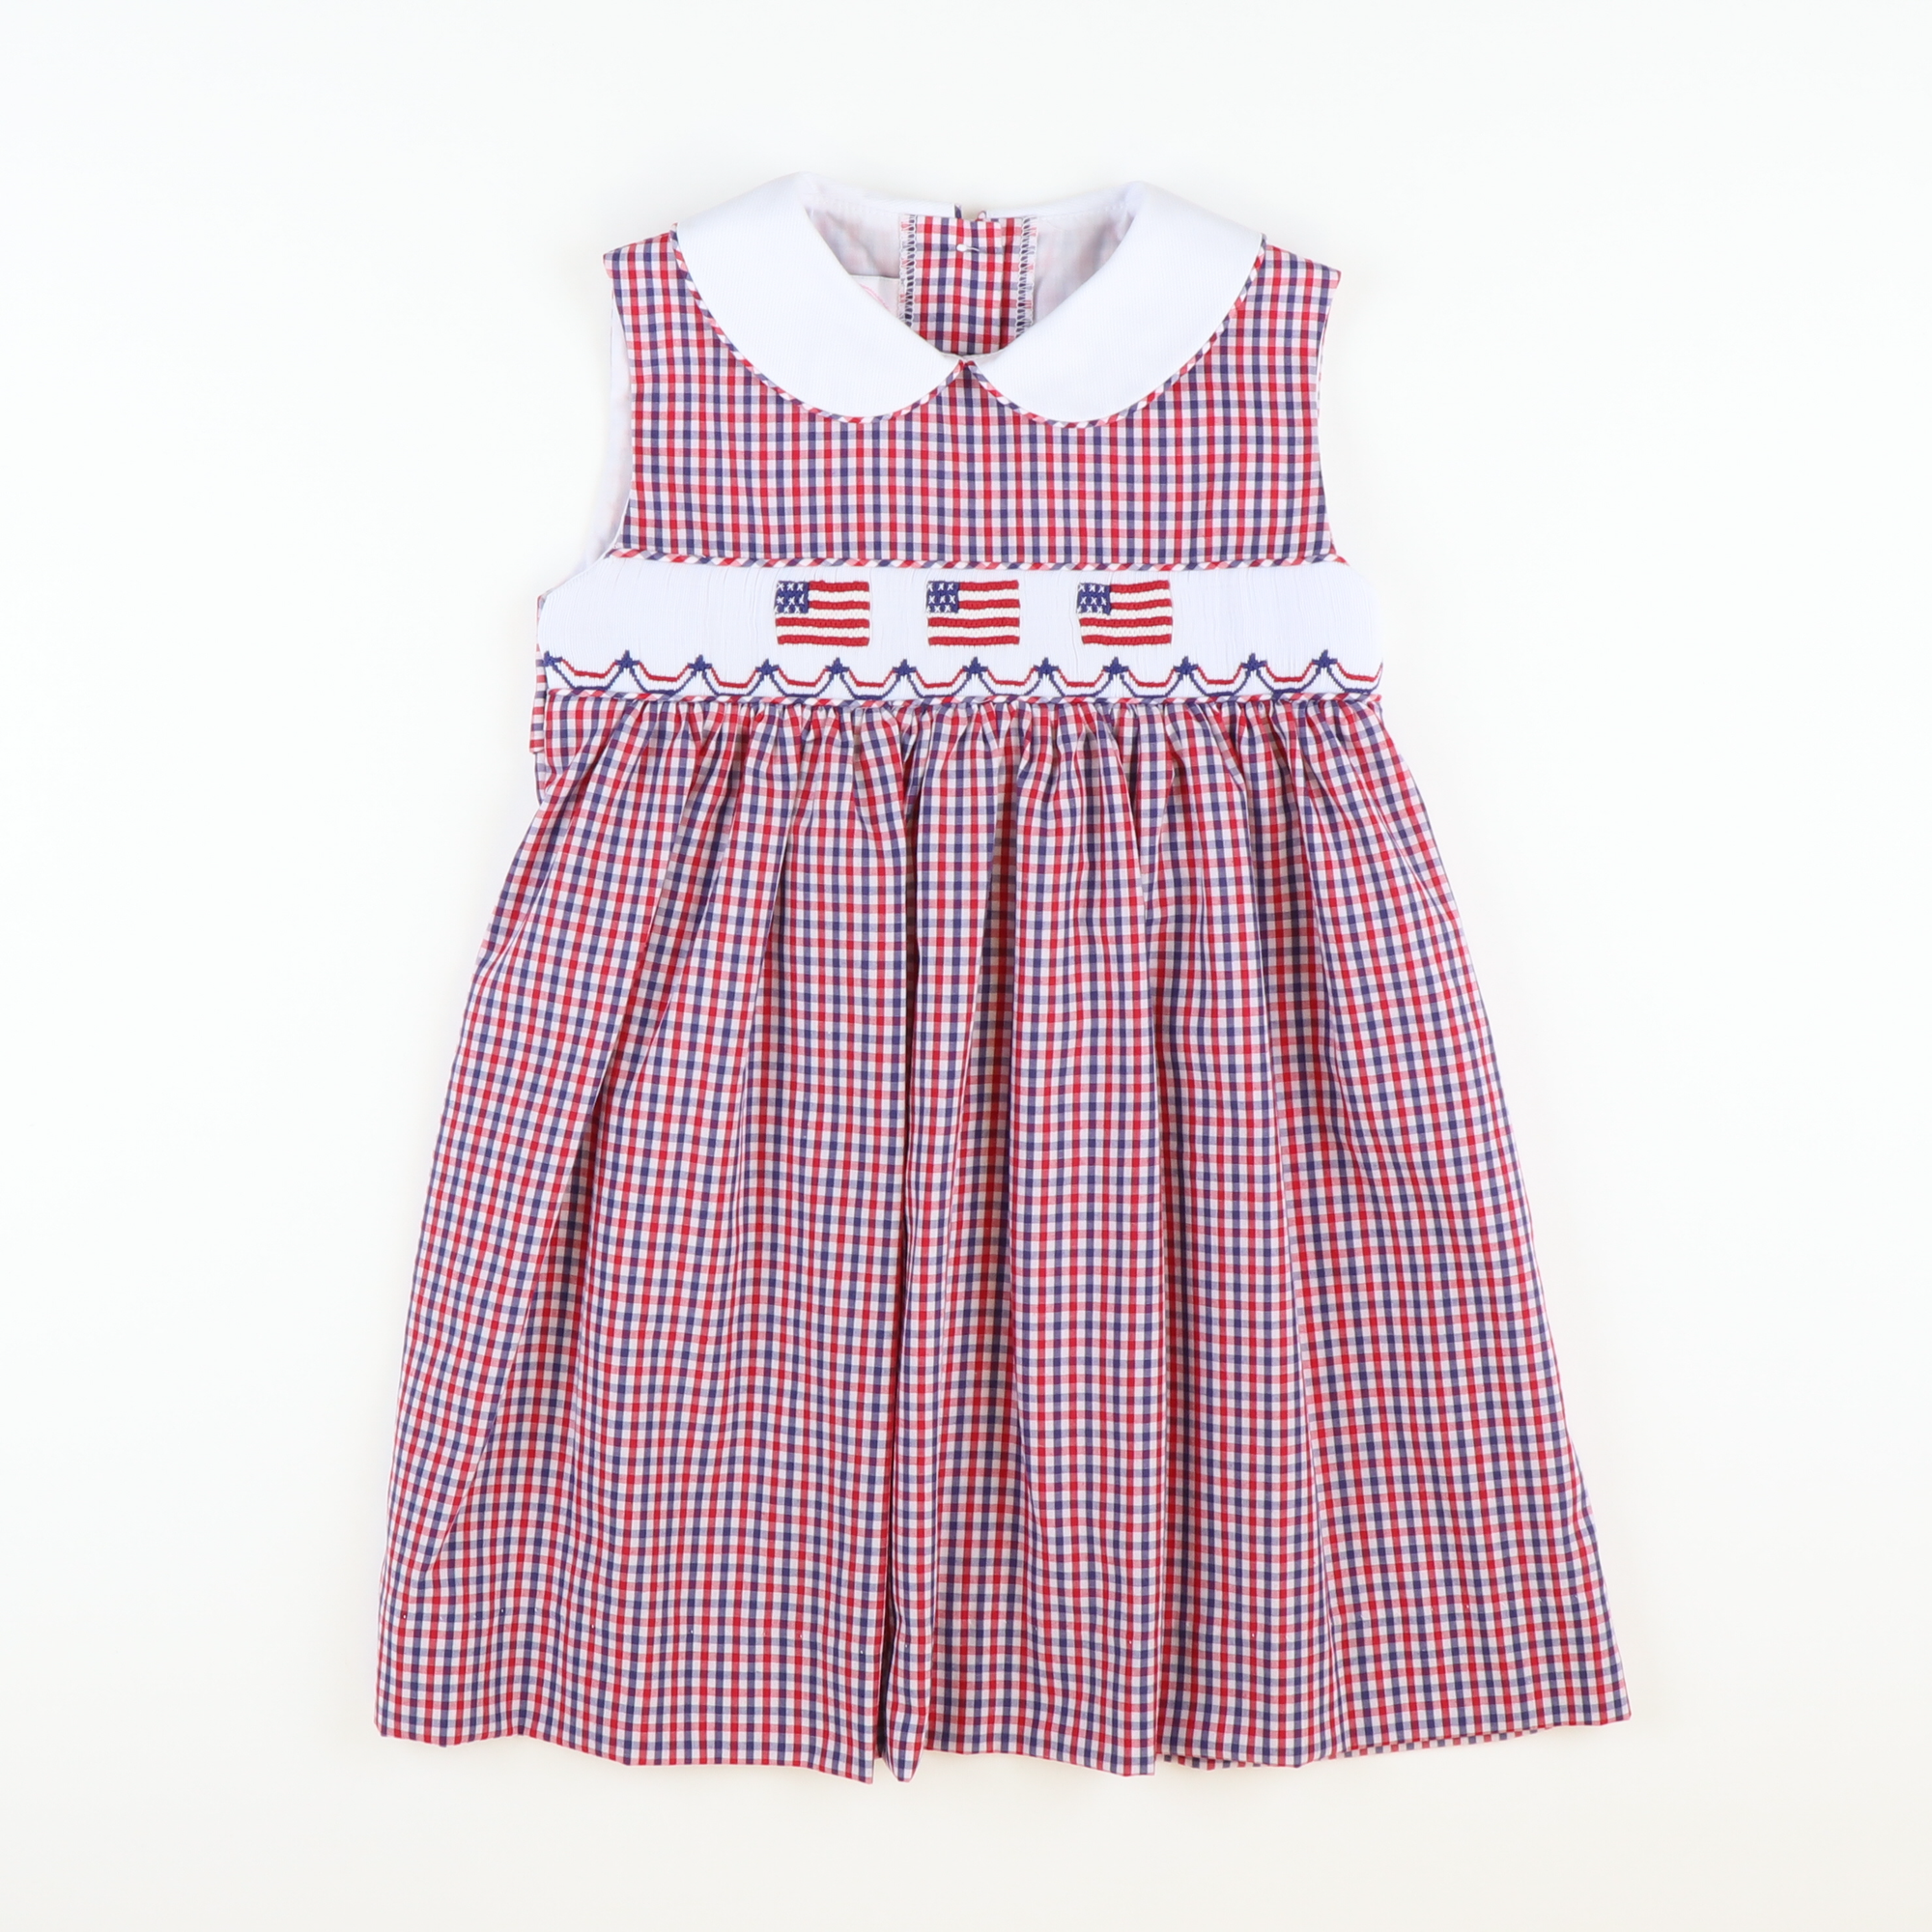 Smocked Liberty Collared Dress - Red and Blue Plaid